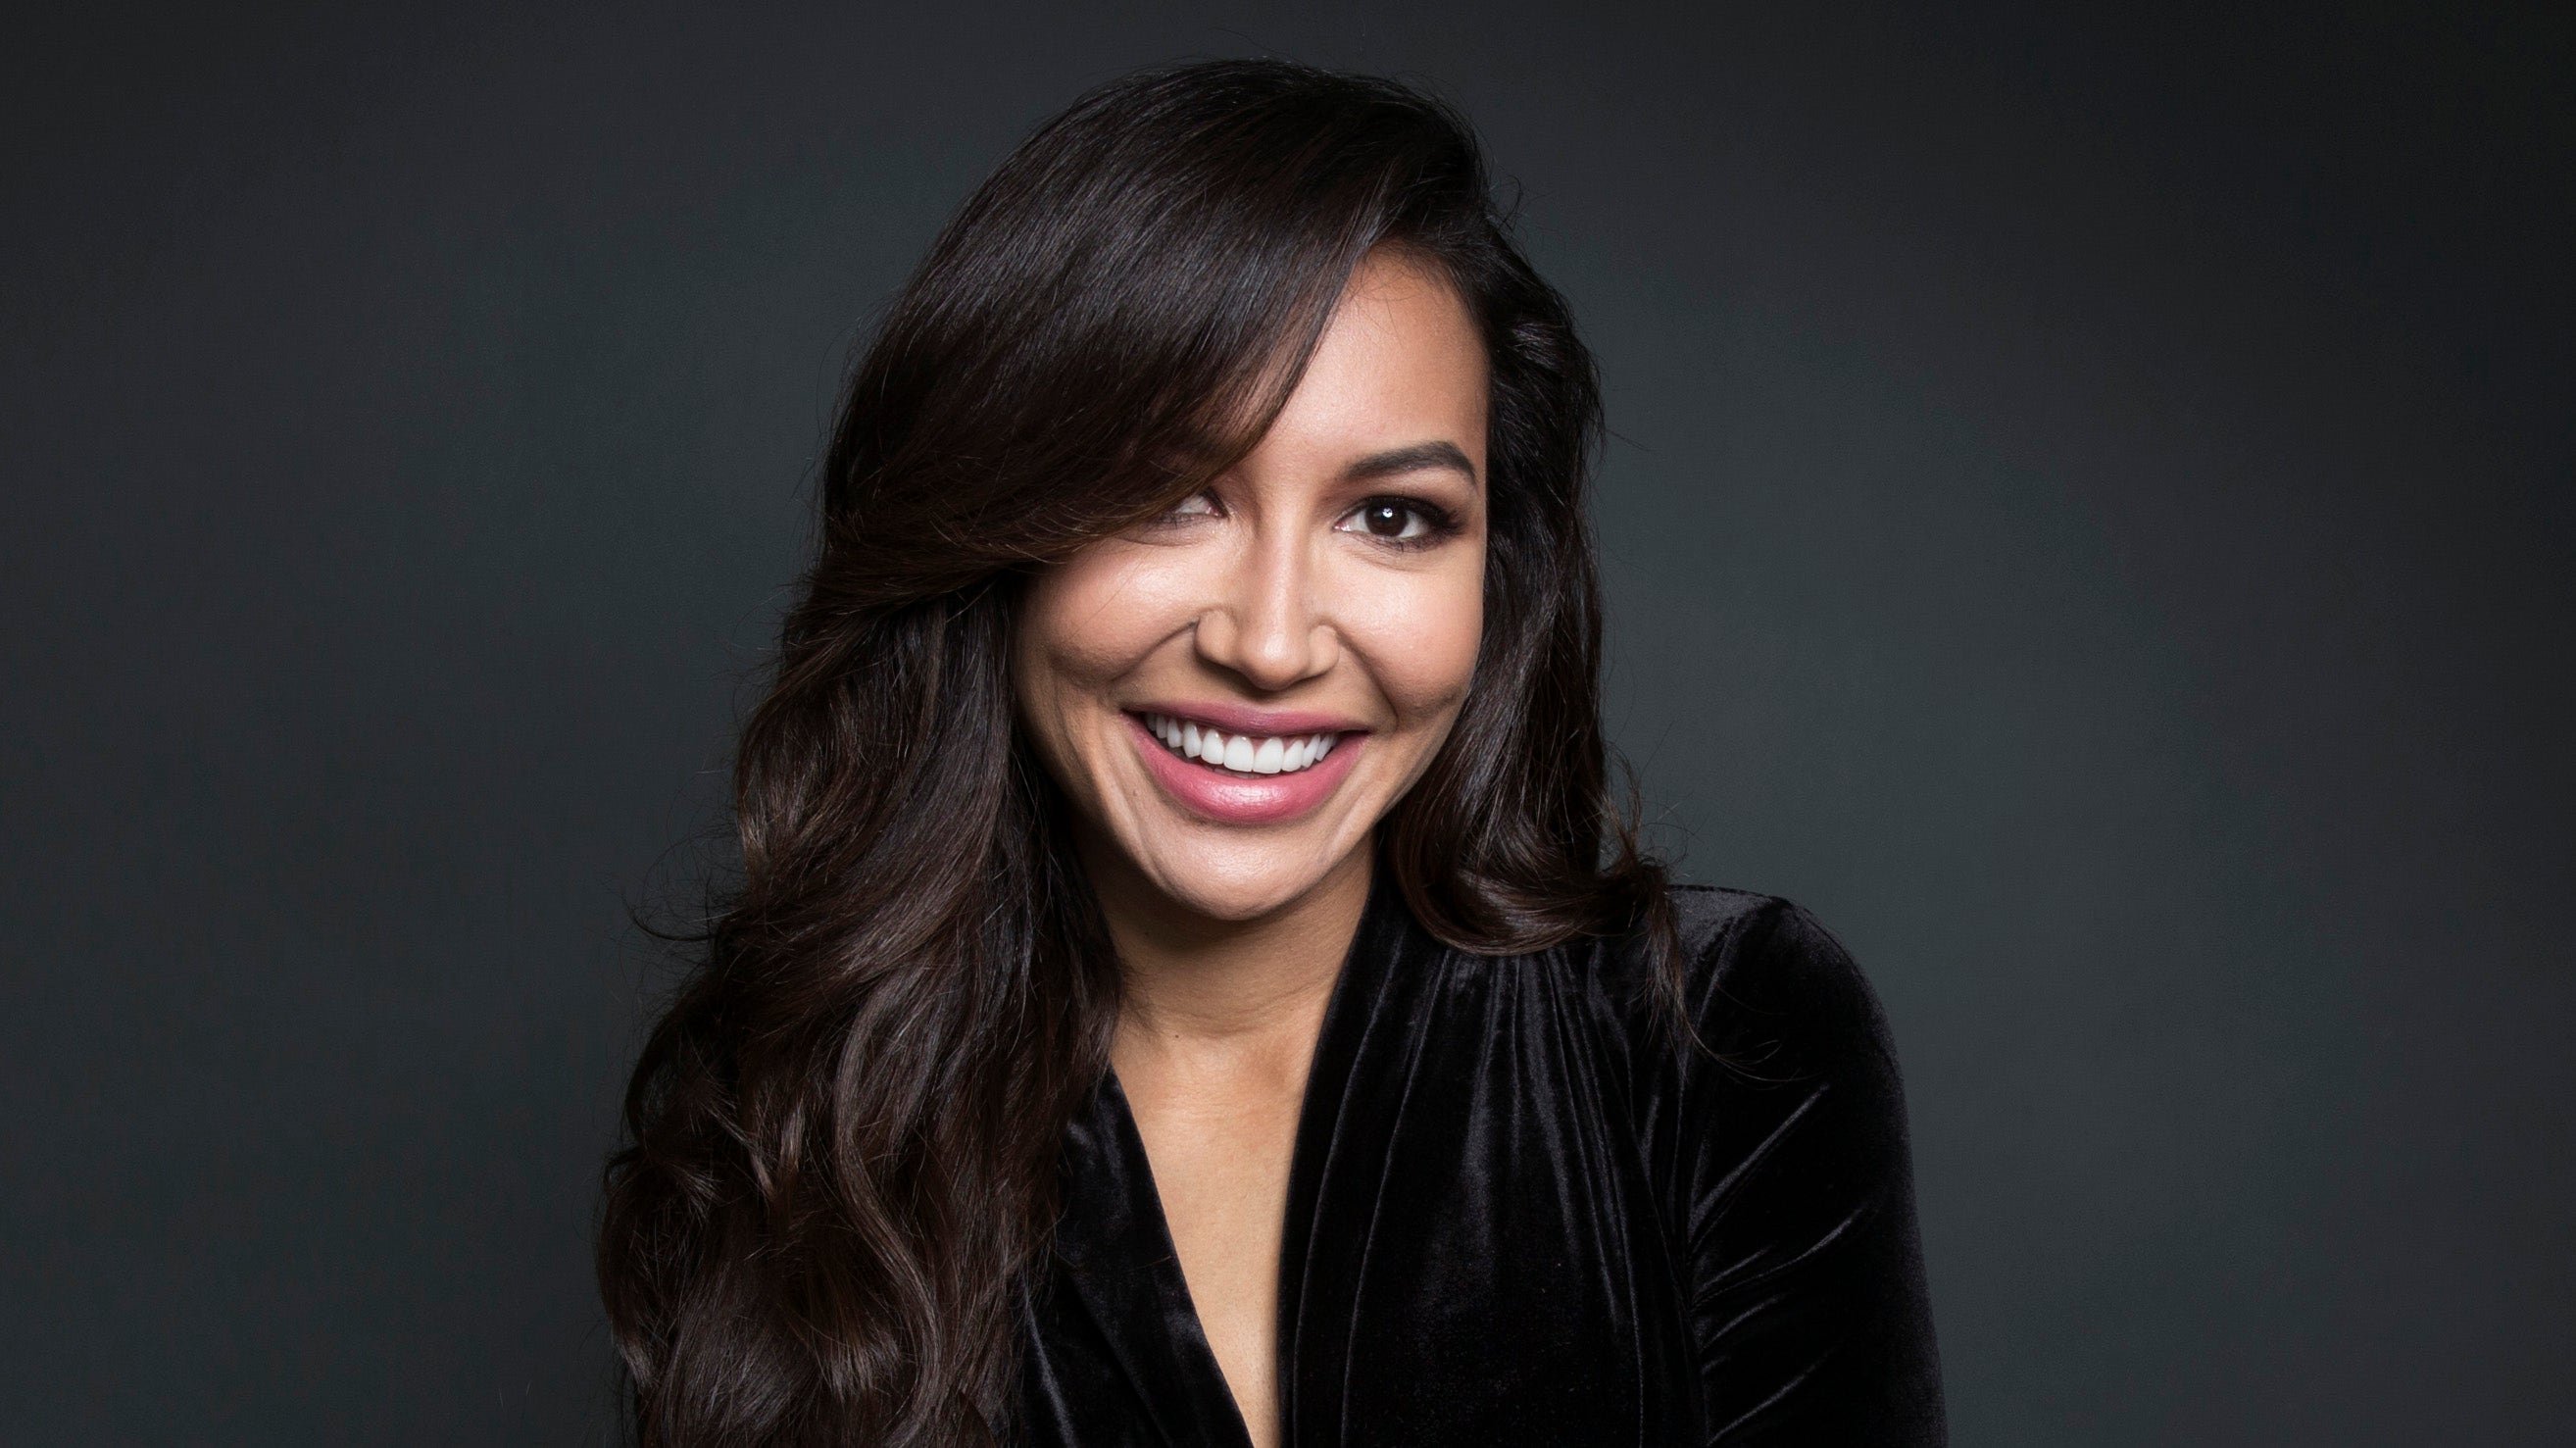 Grammys 2021 criticized for not including Naya Rivera during lengthy 'In Memoriam' segment